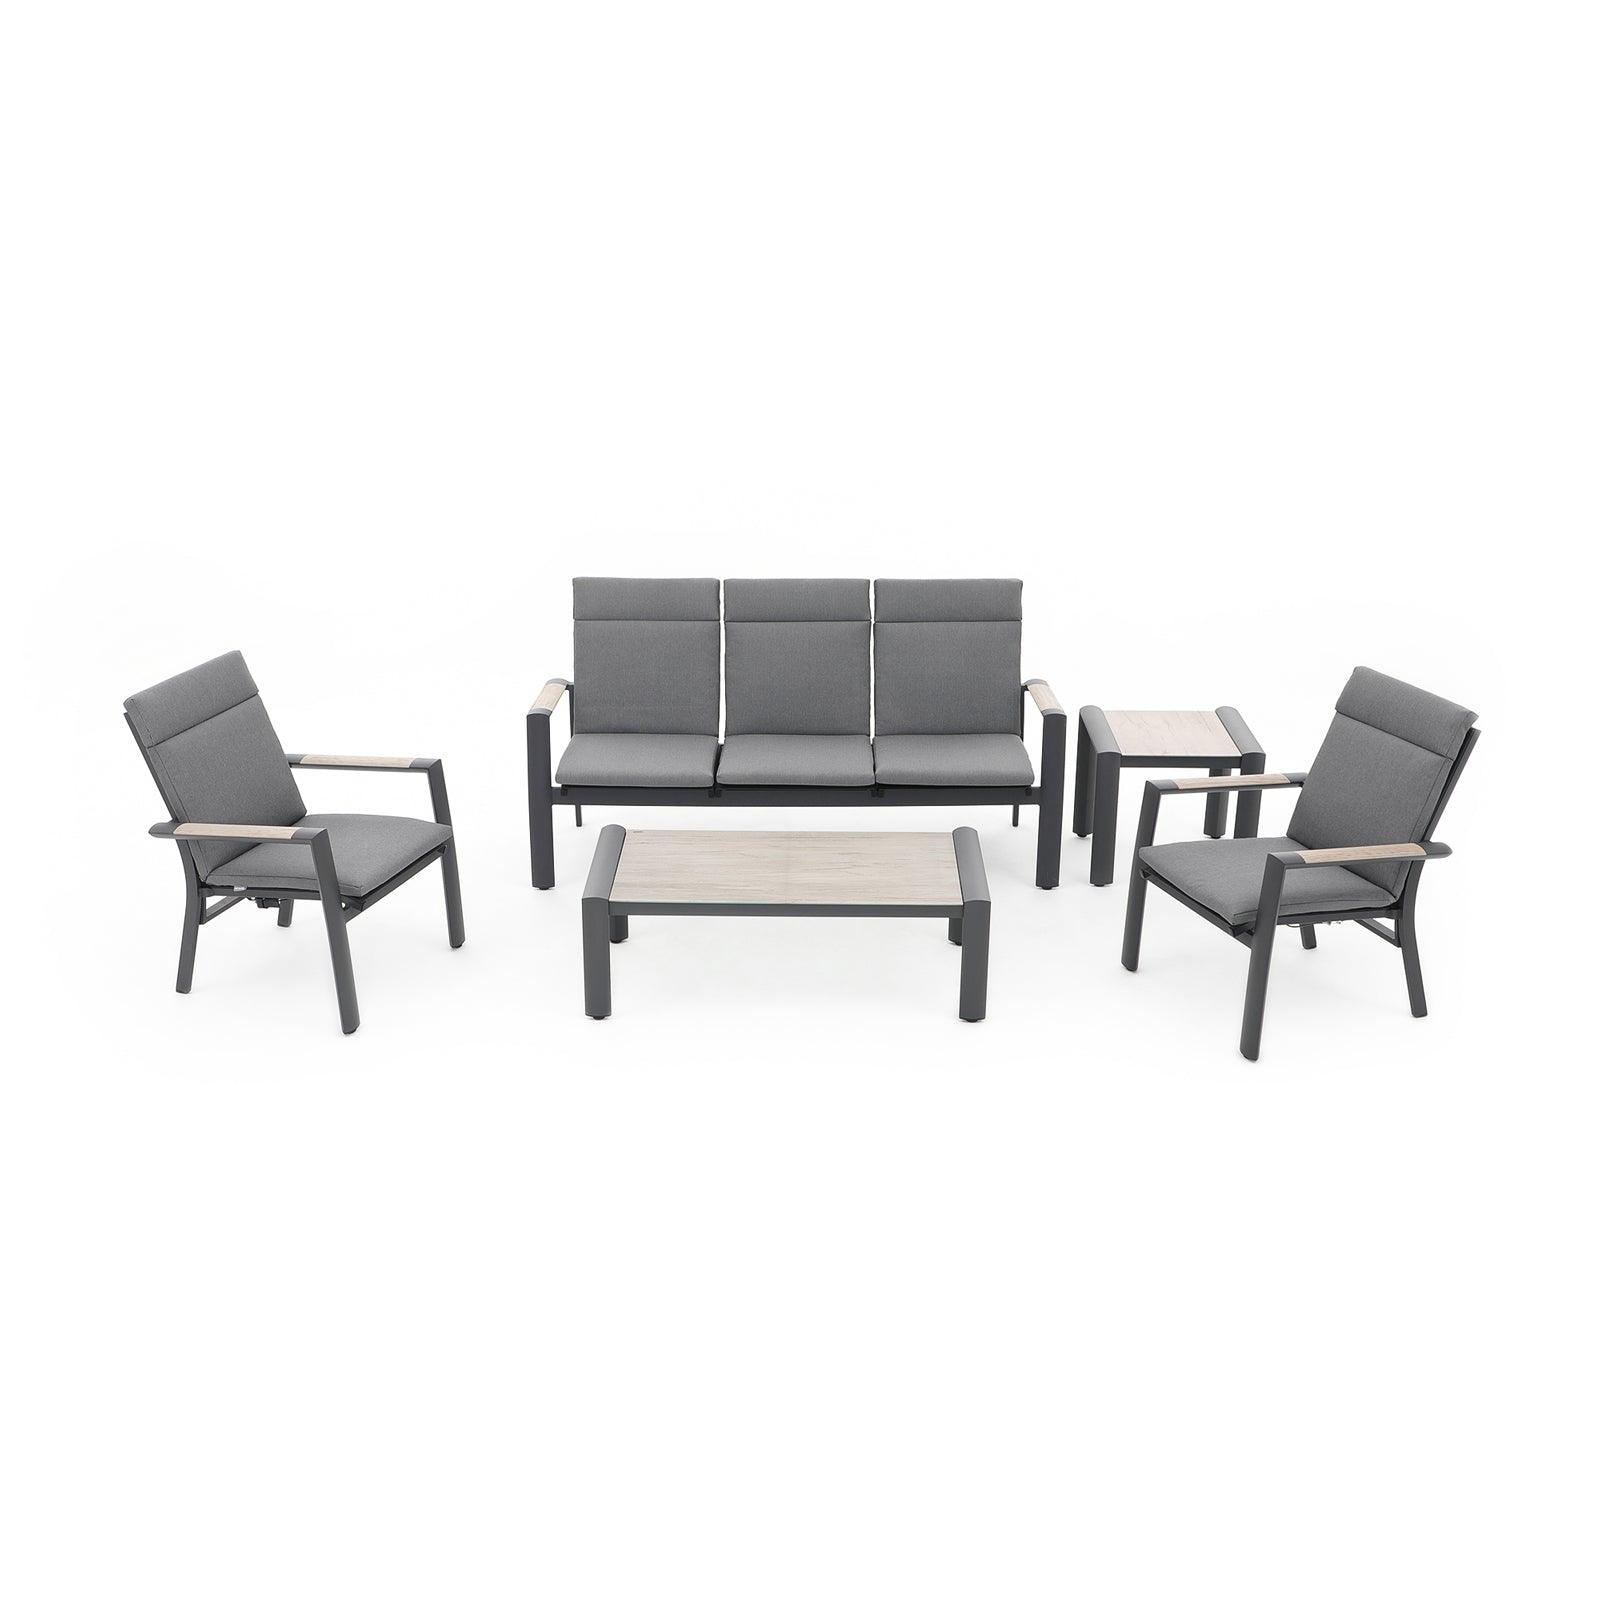 Capri Modern Aluminum Outdoor Furniture, 5-Piece grey outdoor conversation set with grey cushions, 1 three-seater sofa with adjustable backrest, 2 armchairs with adjustable backrest, 1 rectangle coffee table, 1 square side table, white background - Jardina Furniture